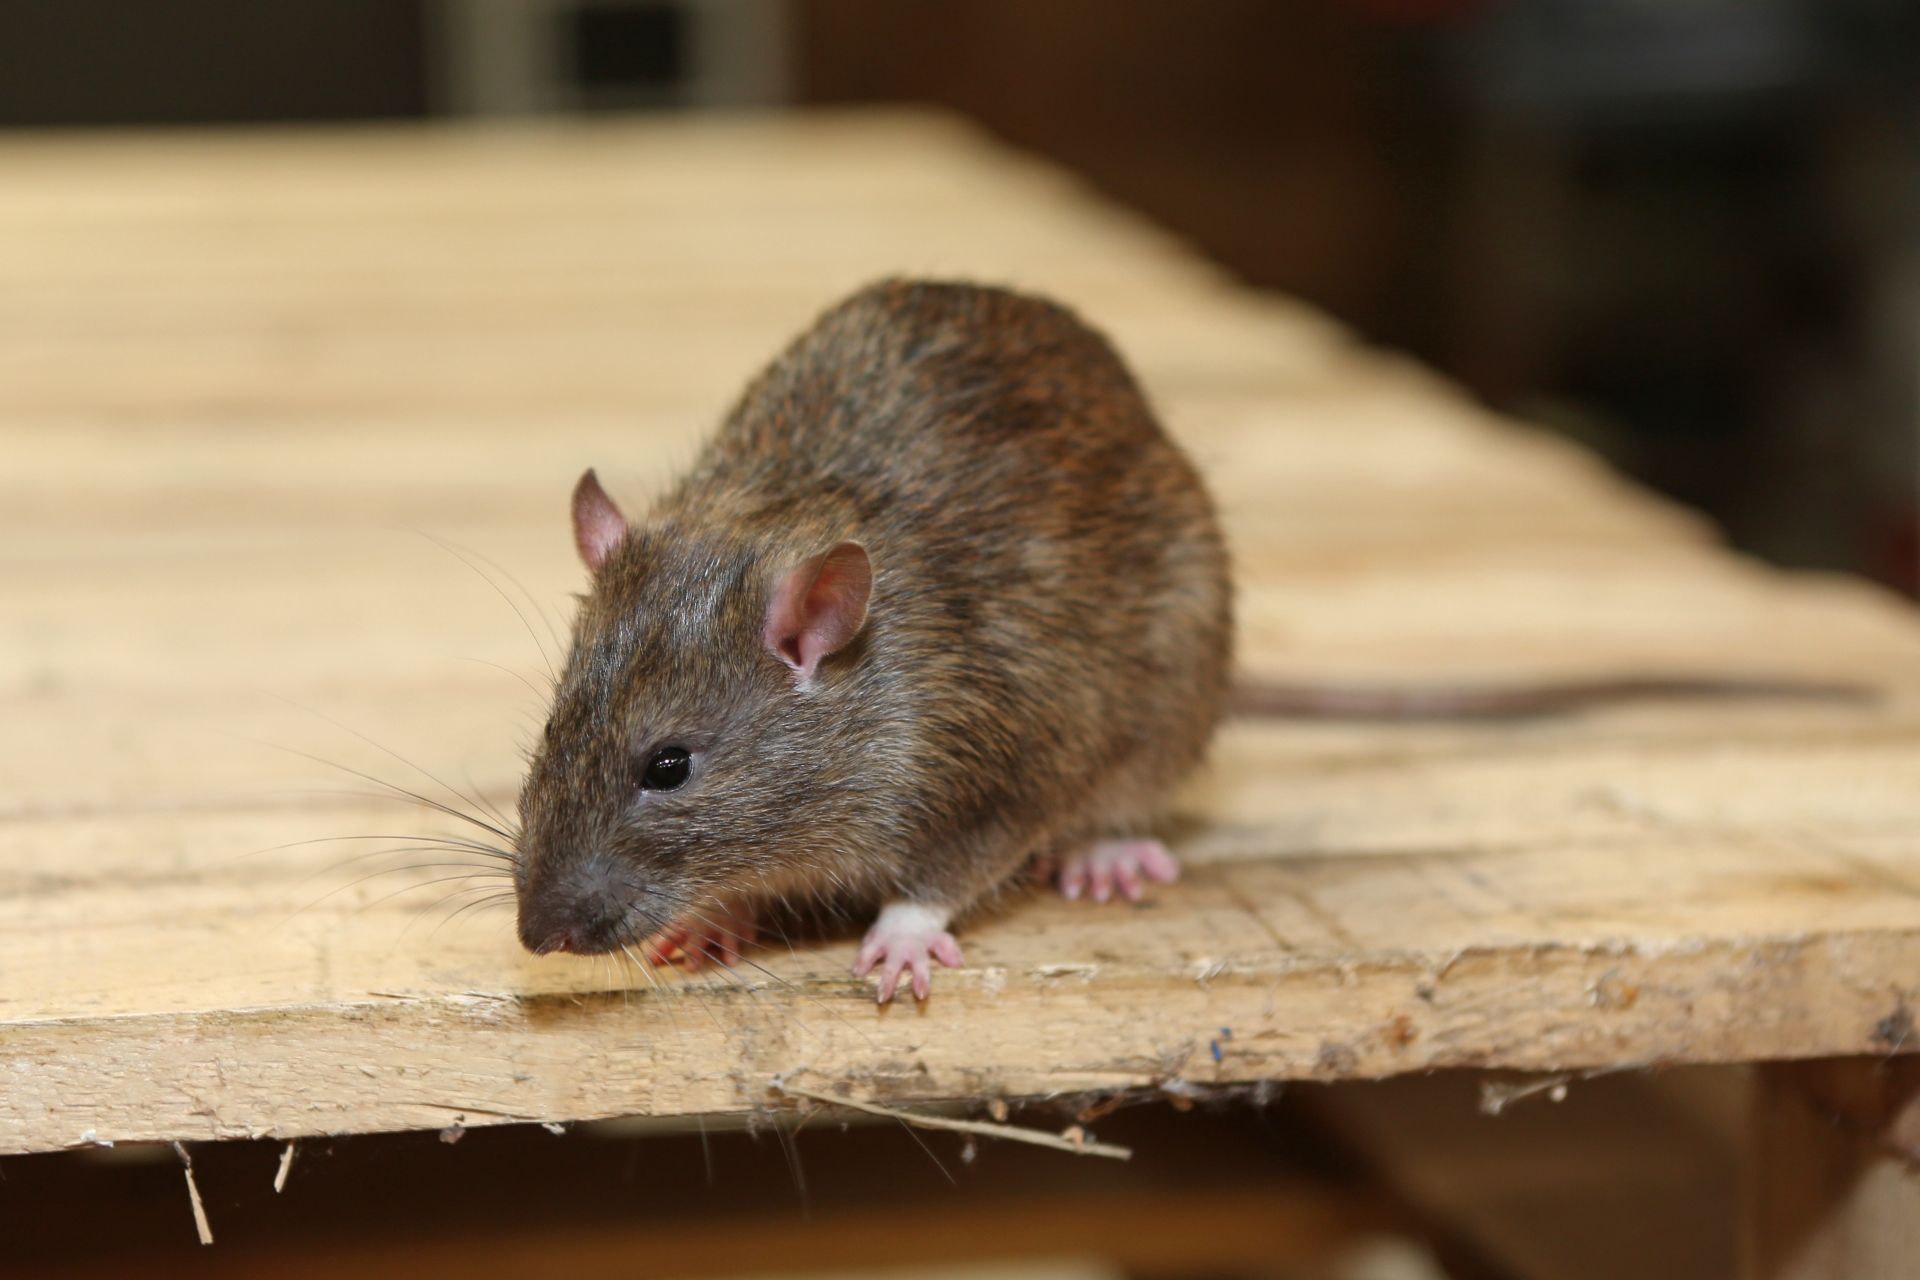 Rat extermination, Pest Control in Highgate, N6. Call Now 020 8166 9746